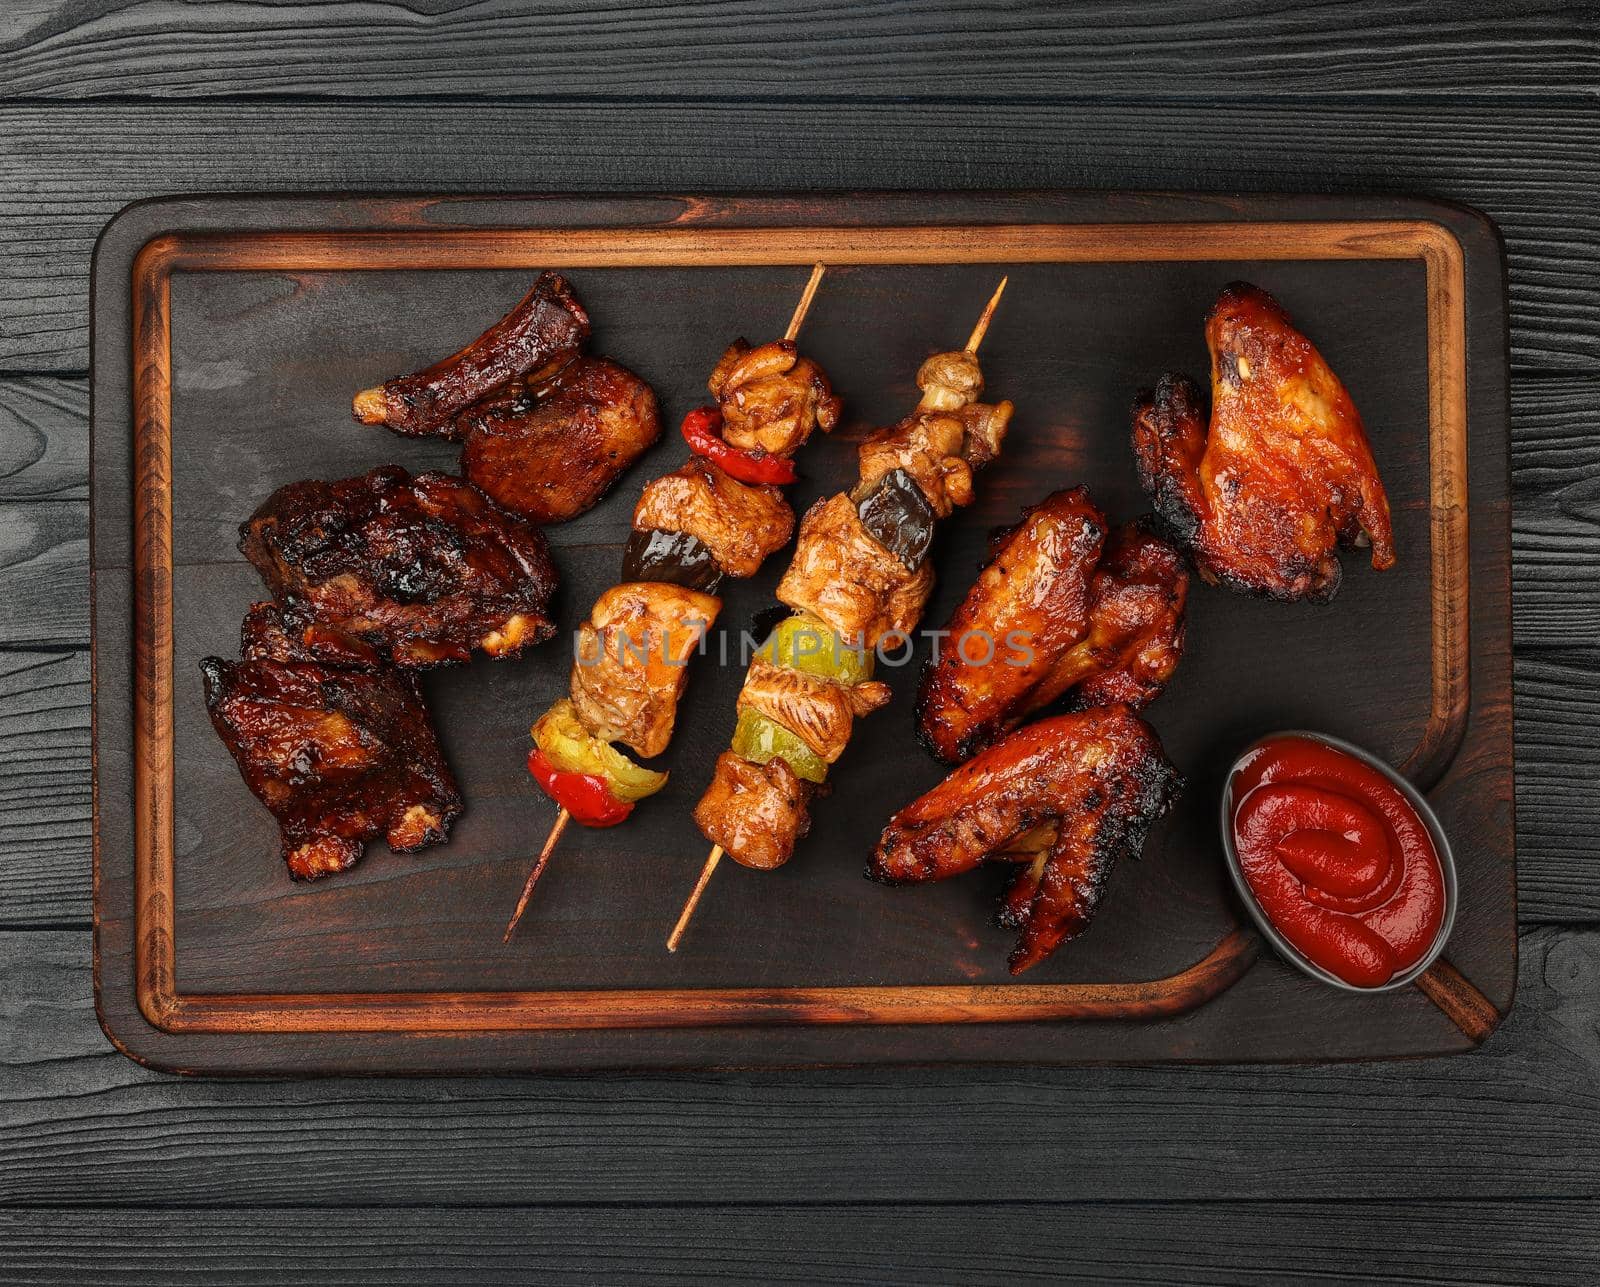 Close up portion of mixed grilled barbecue combo plate with chicken buffalo wings, beef spare ribs and skewer meat on wooden board over black table planks, elevated top view, directly above